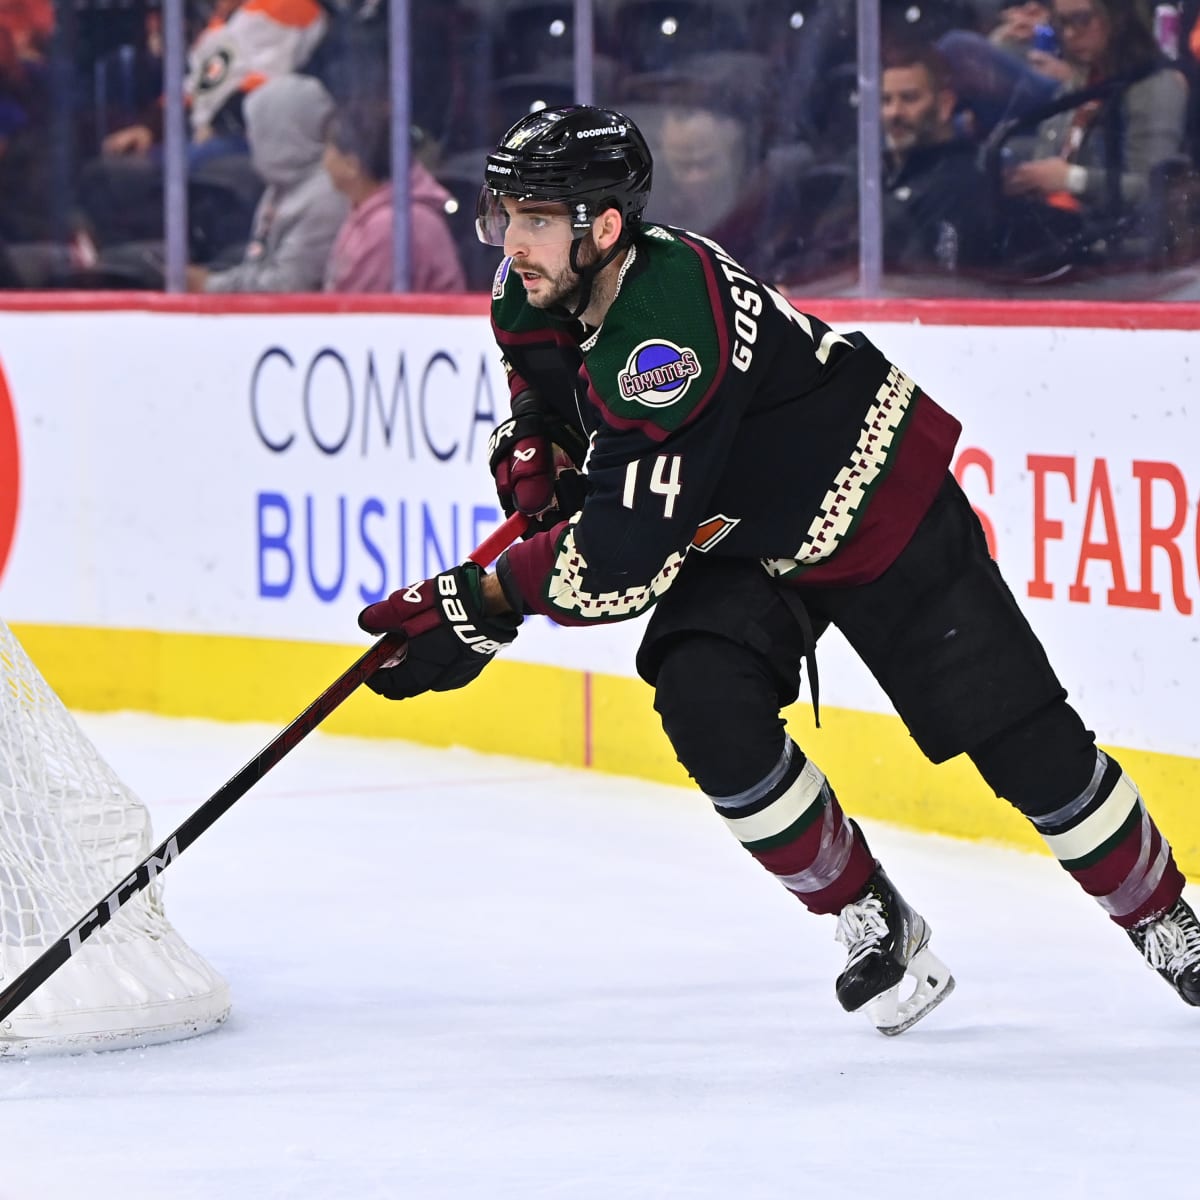 NHL Network on X: The Arizona Coyotes have traded for forward